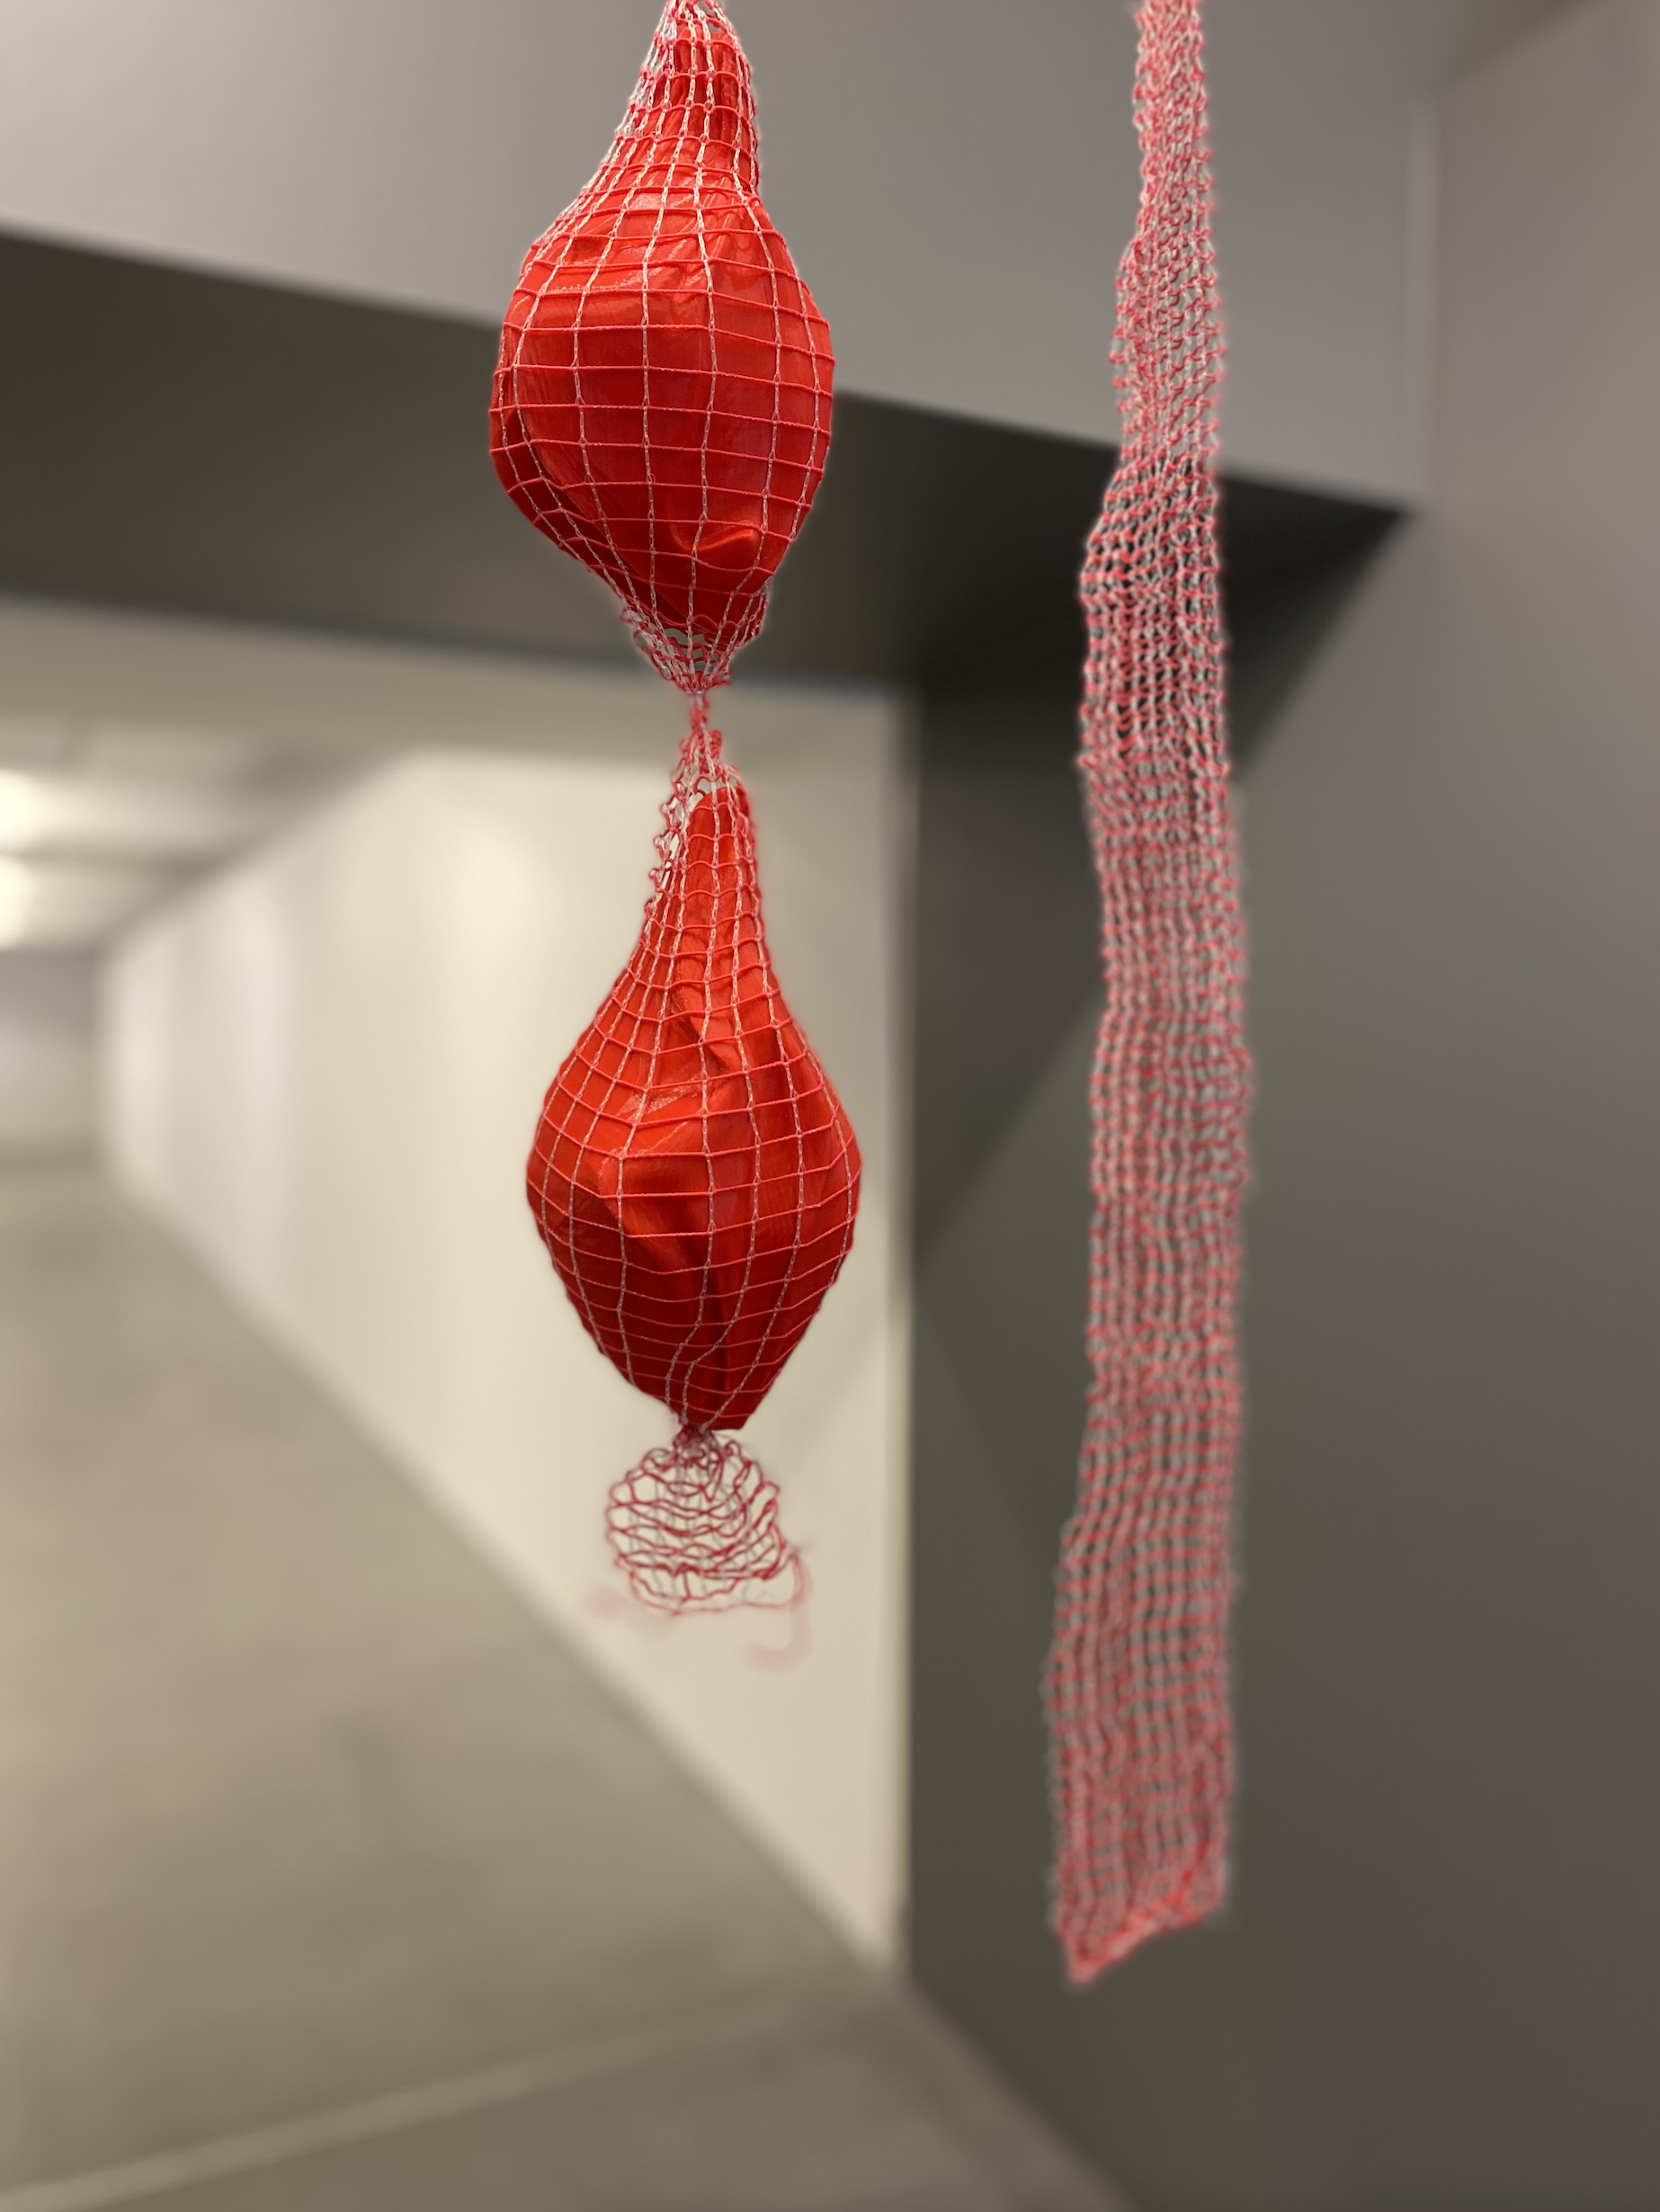 Within Cells Intertwined, 3D printed philament sculpture, meat net